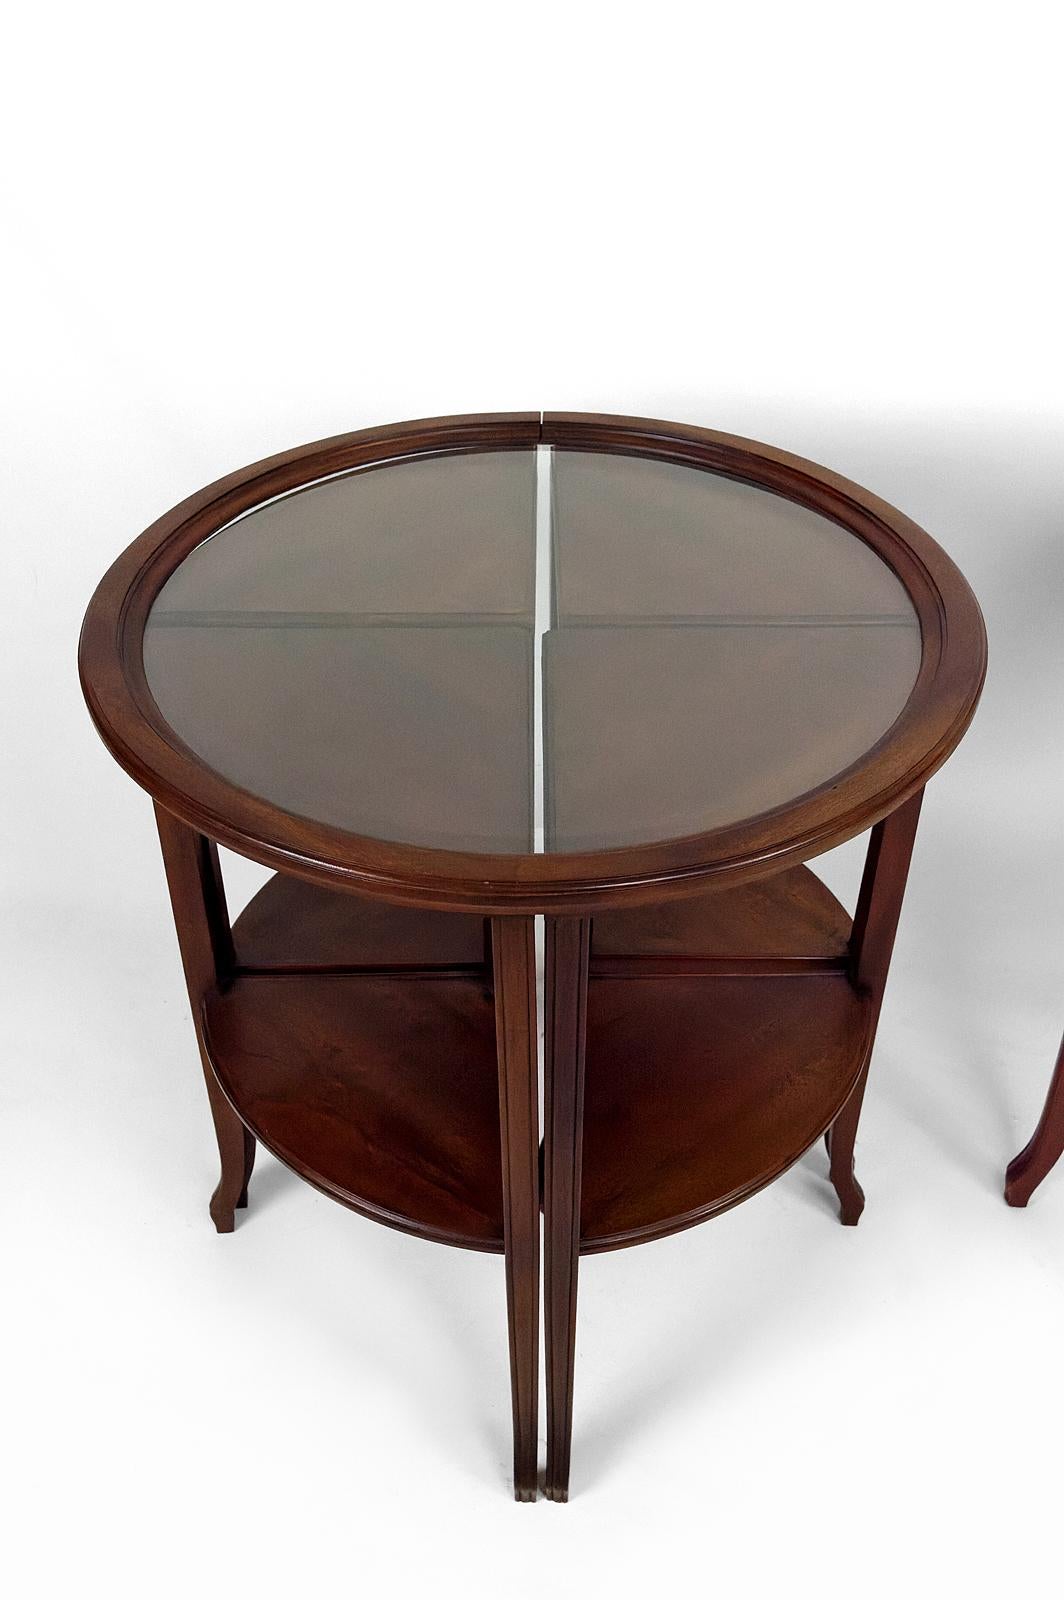 Serving table / nesting tables convertible into 2 side tables, Art Nouveau, 1910 For Sale 4